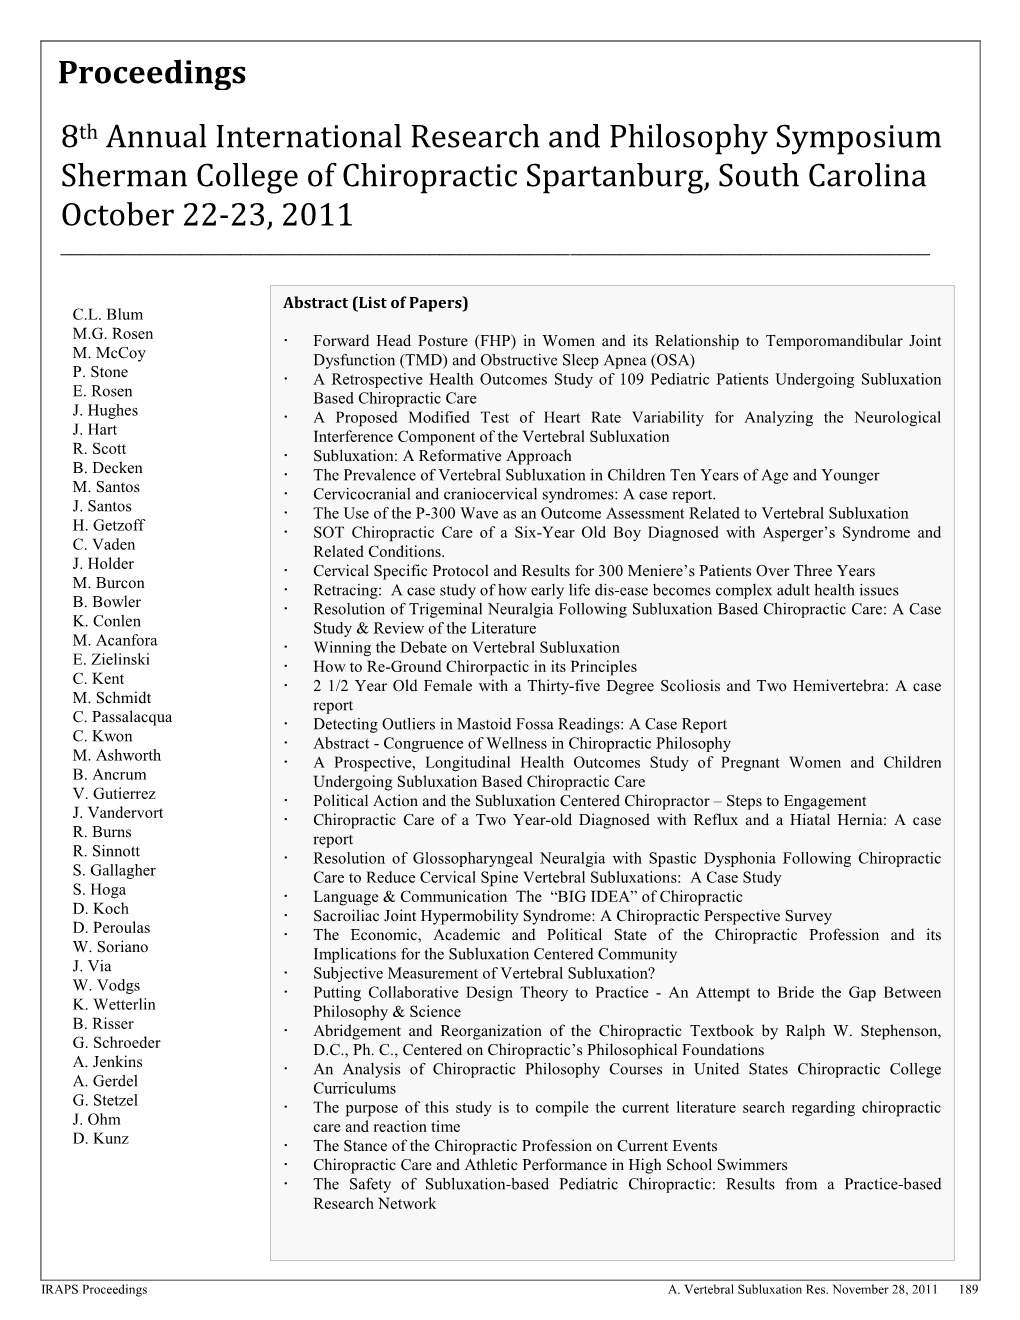 8Th Annual International Research and Philosophy Symposium Sherman College of Chiropractic Spartanburg, South Carolina October 22-23, 2011 ______